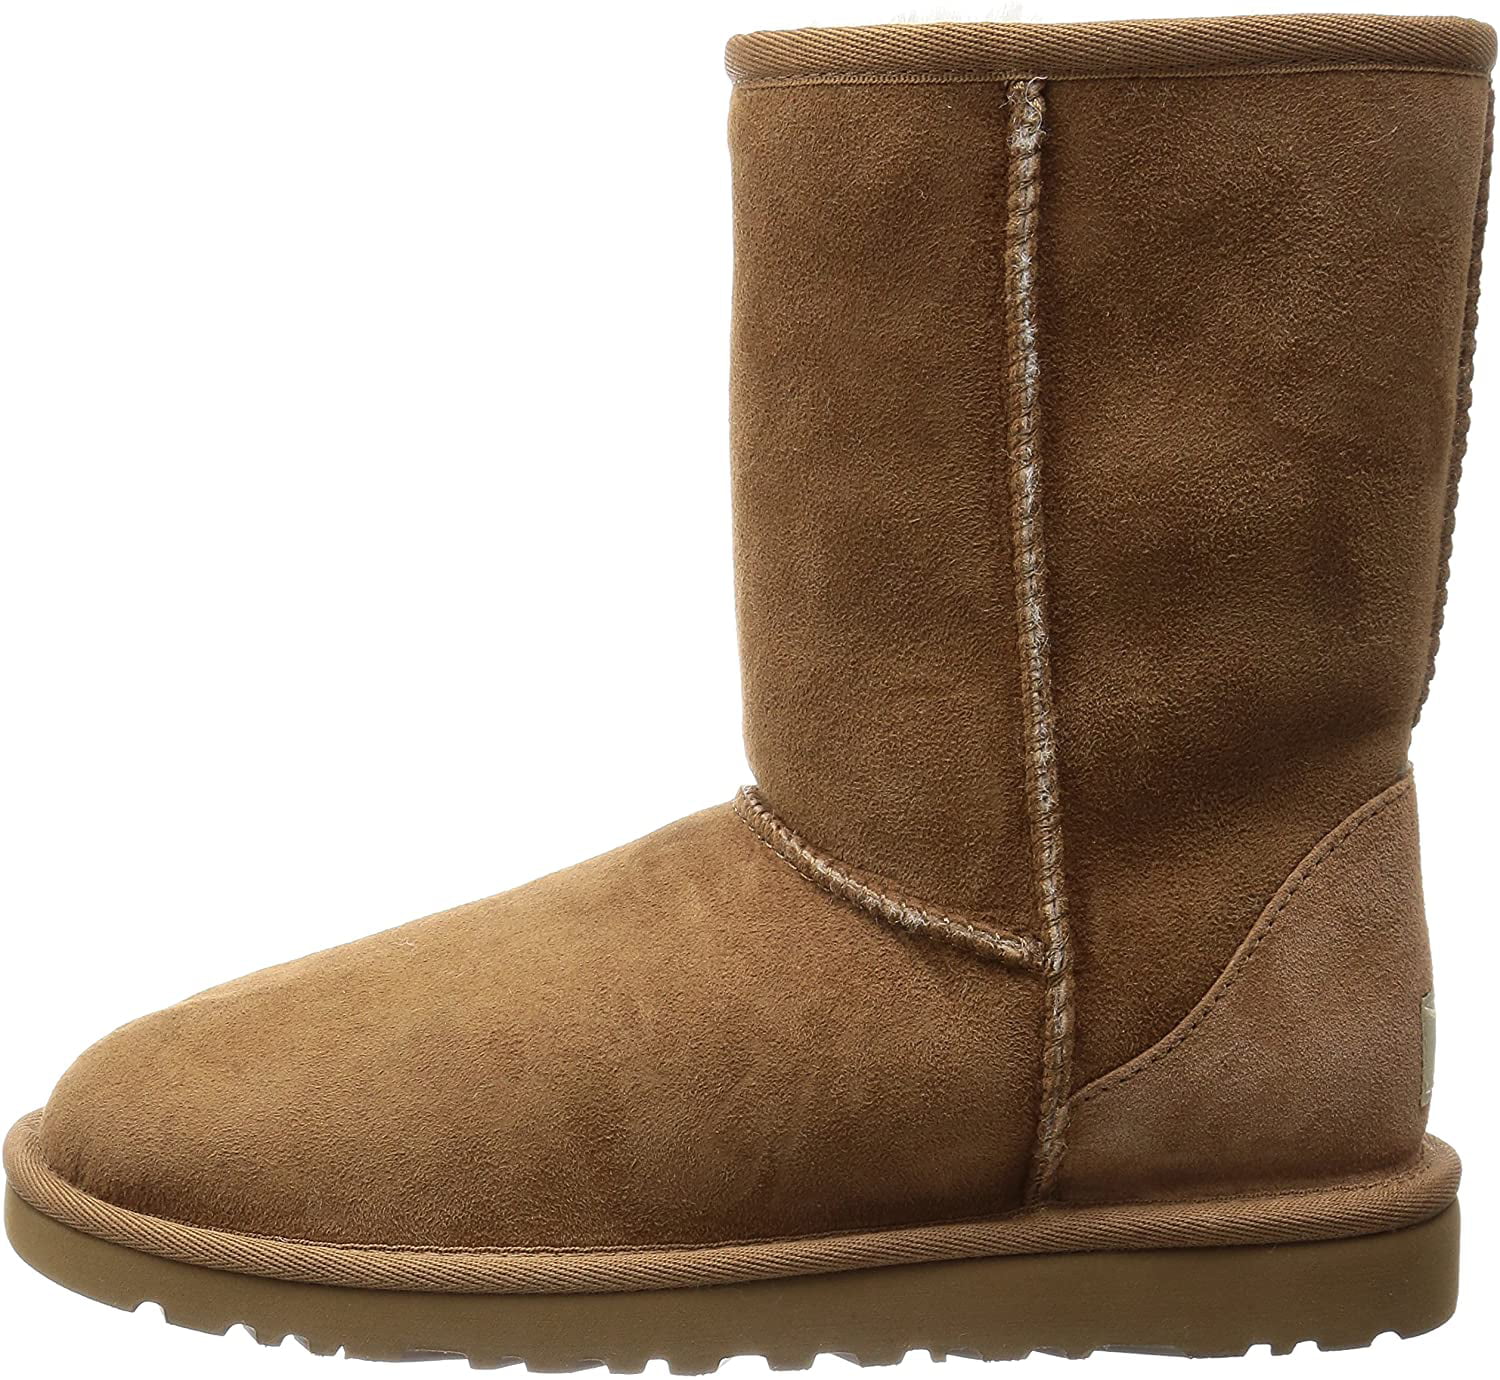 classic ugg boots chestnut